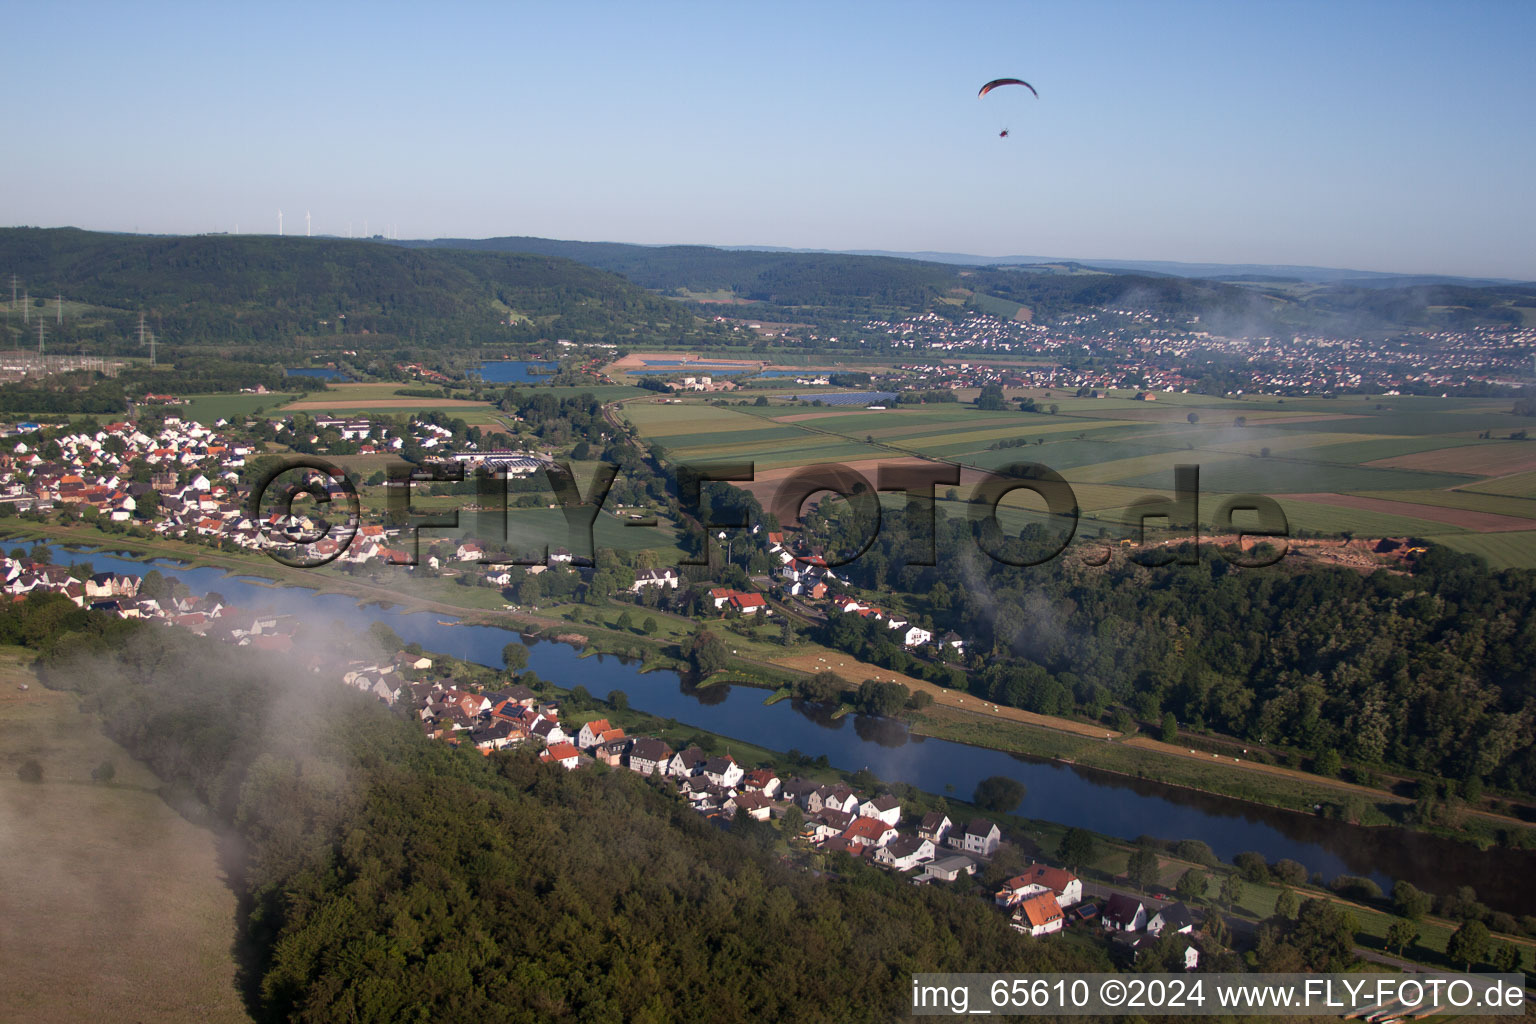 Village on the river bank areas of the Weser river between the district Herstelle and Wuergassen in Beverungen in the state North Rhine-Westphalia, Germany